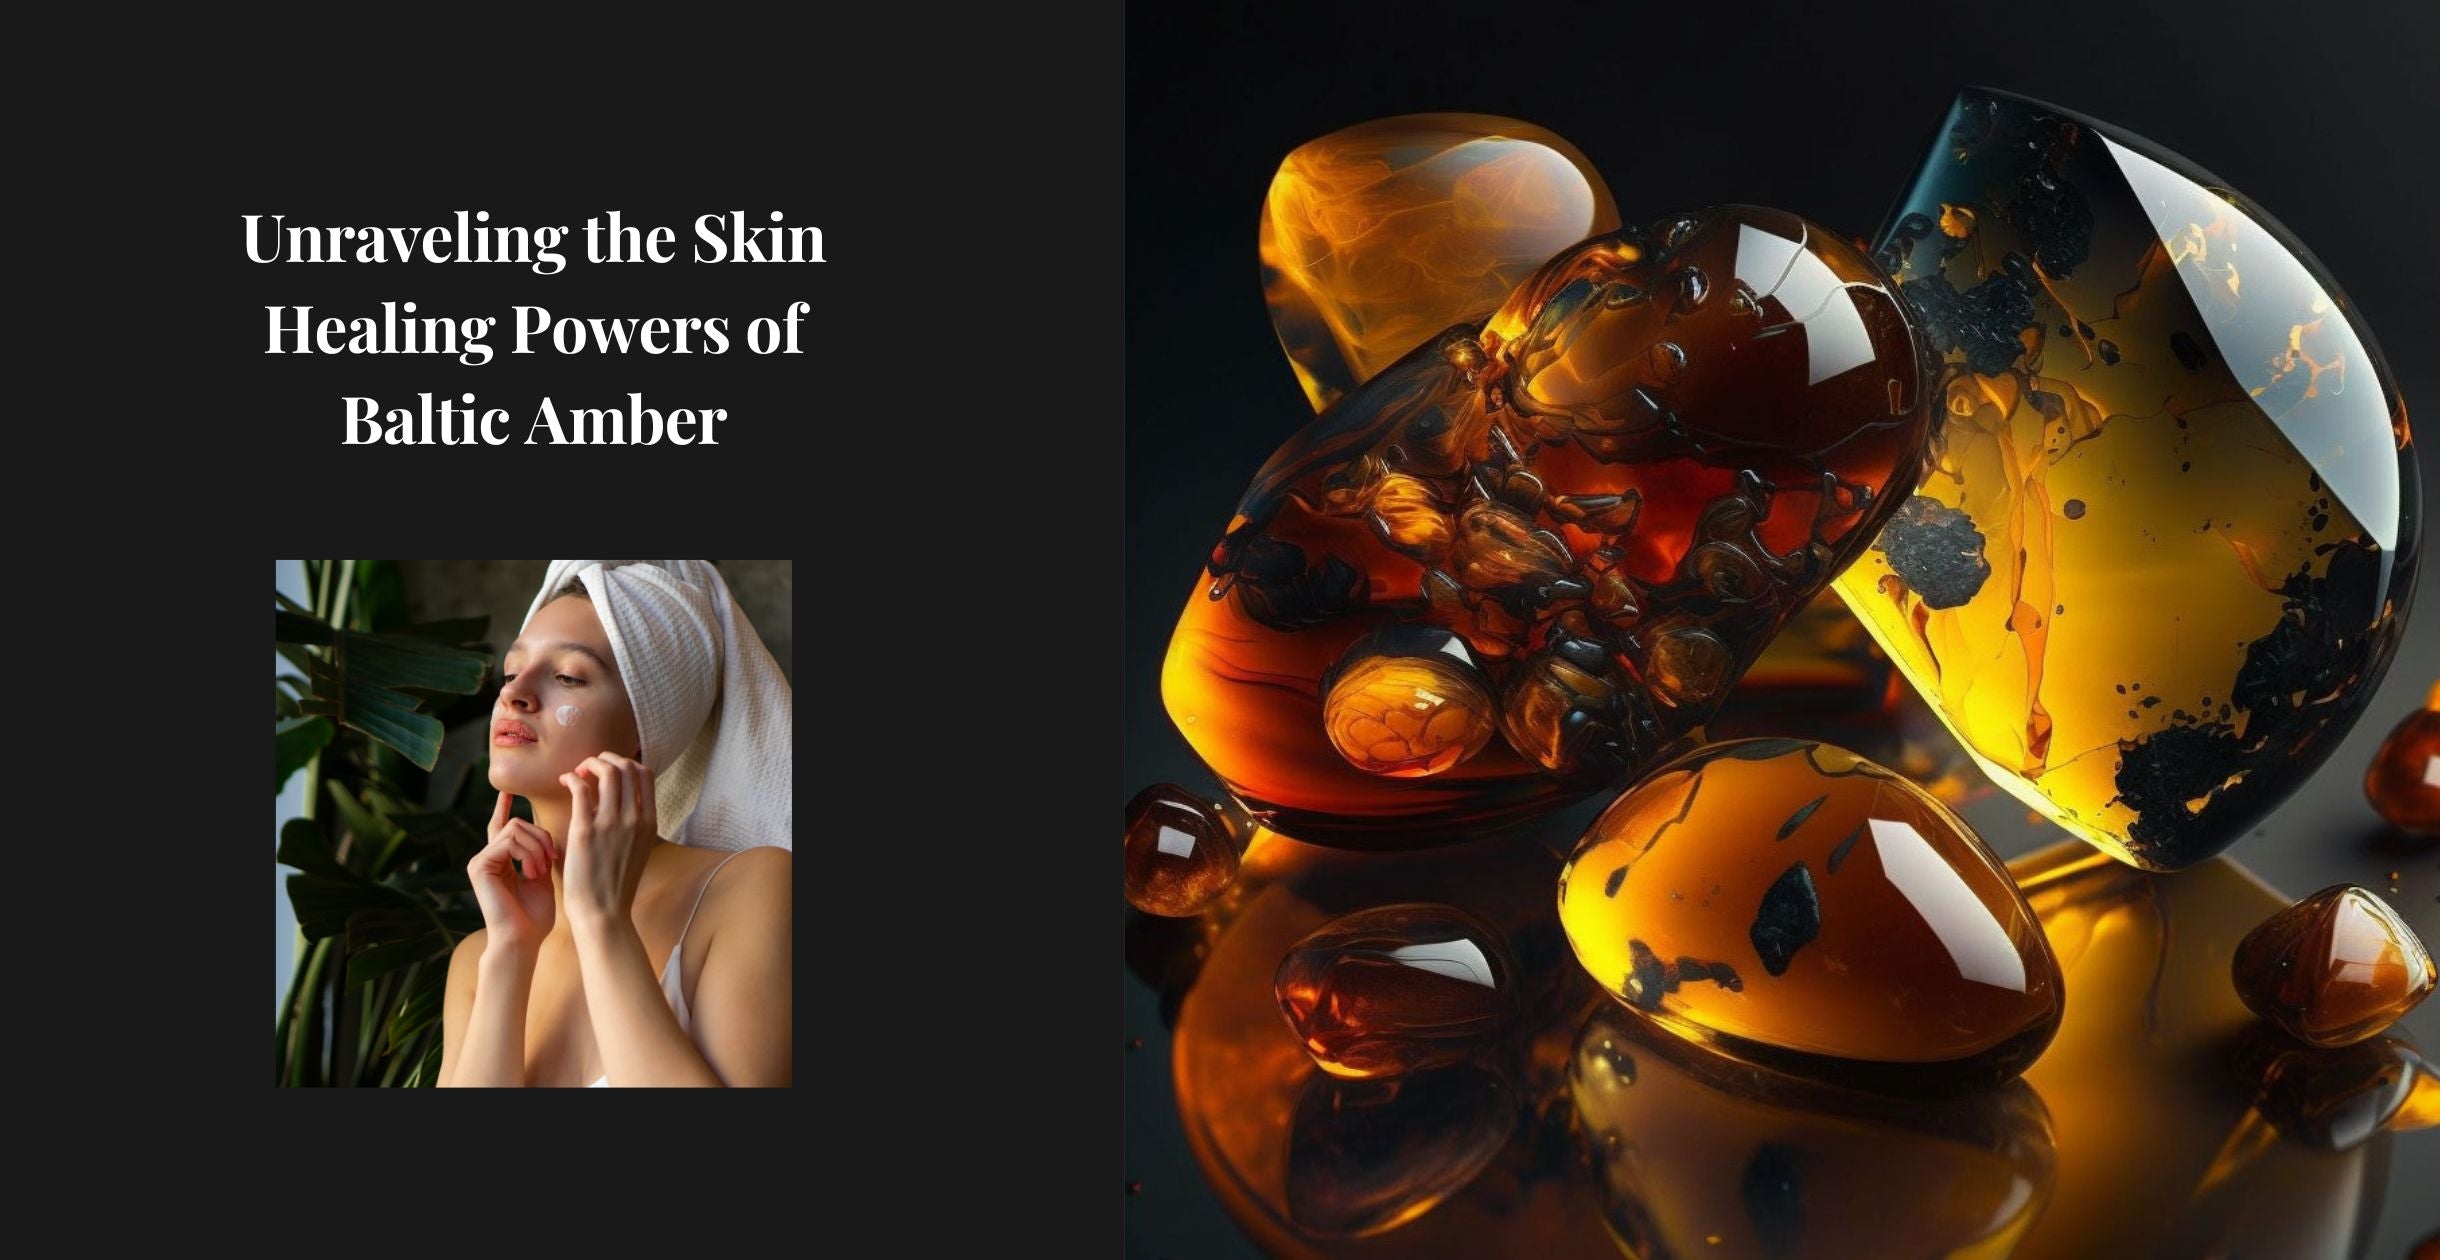 Unraveling the Skin Healing Powers of Baltic Amber